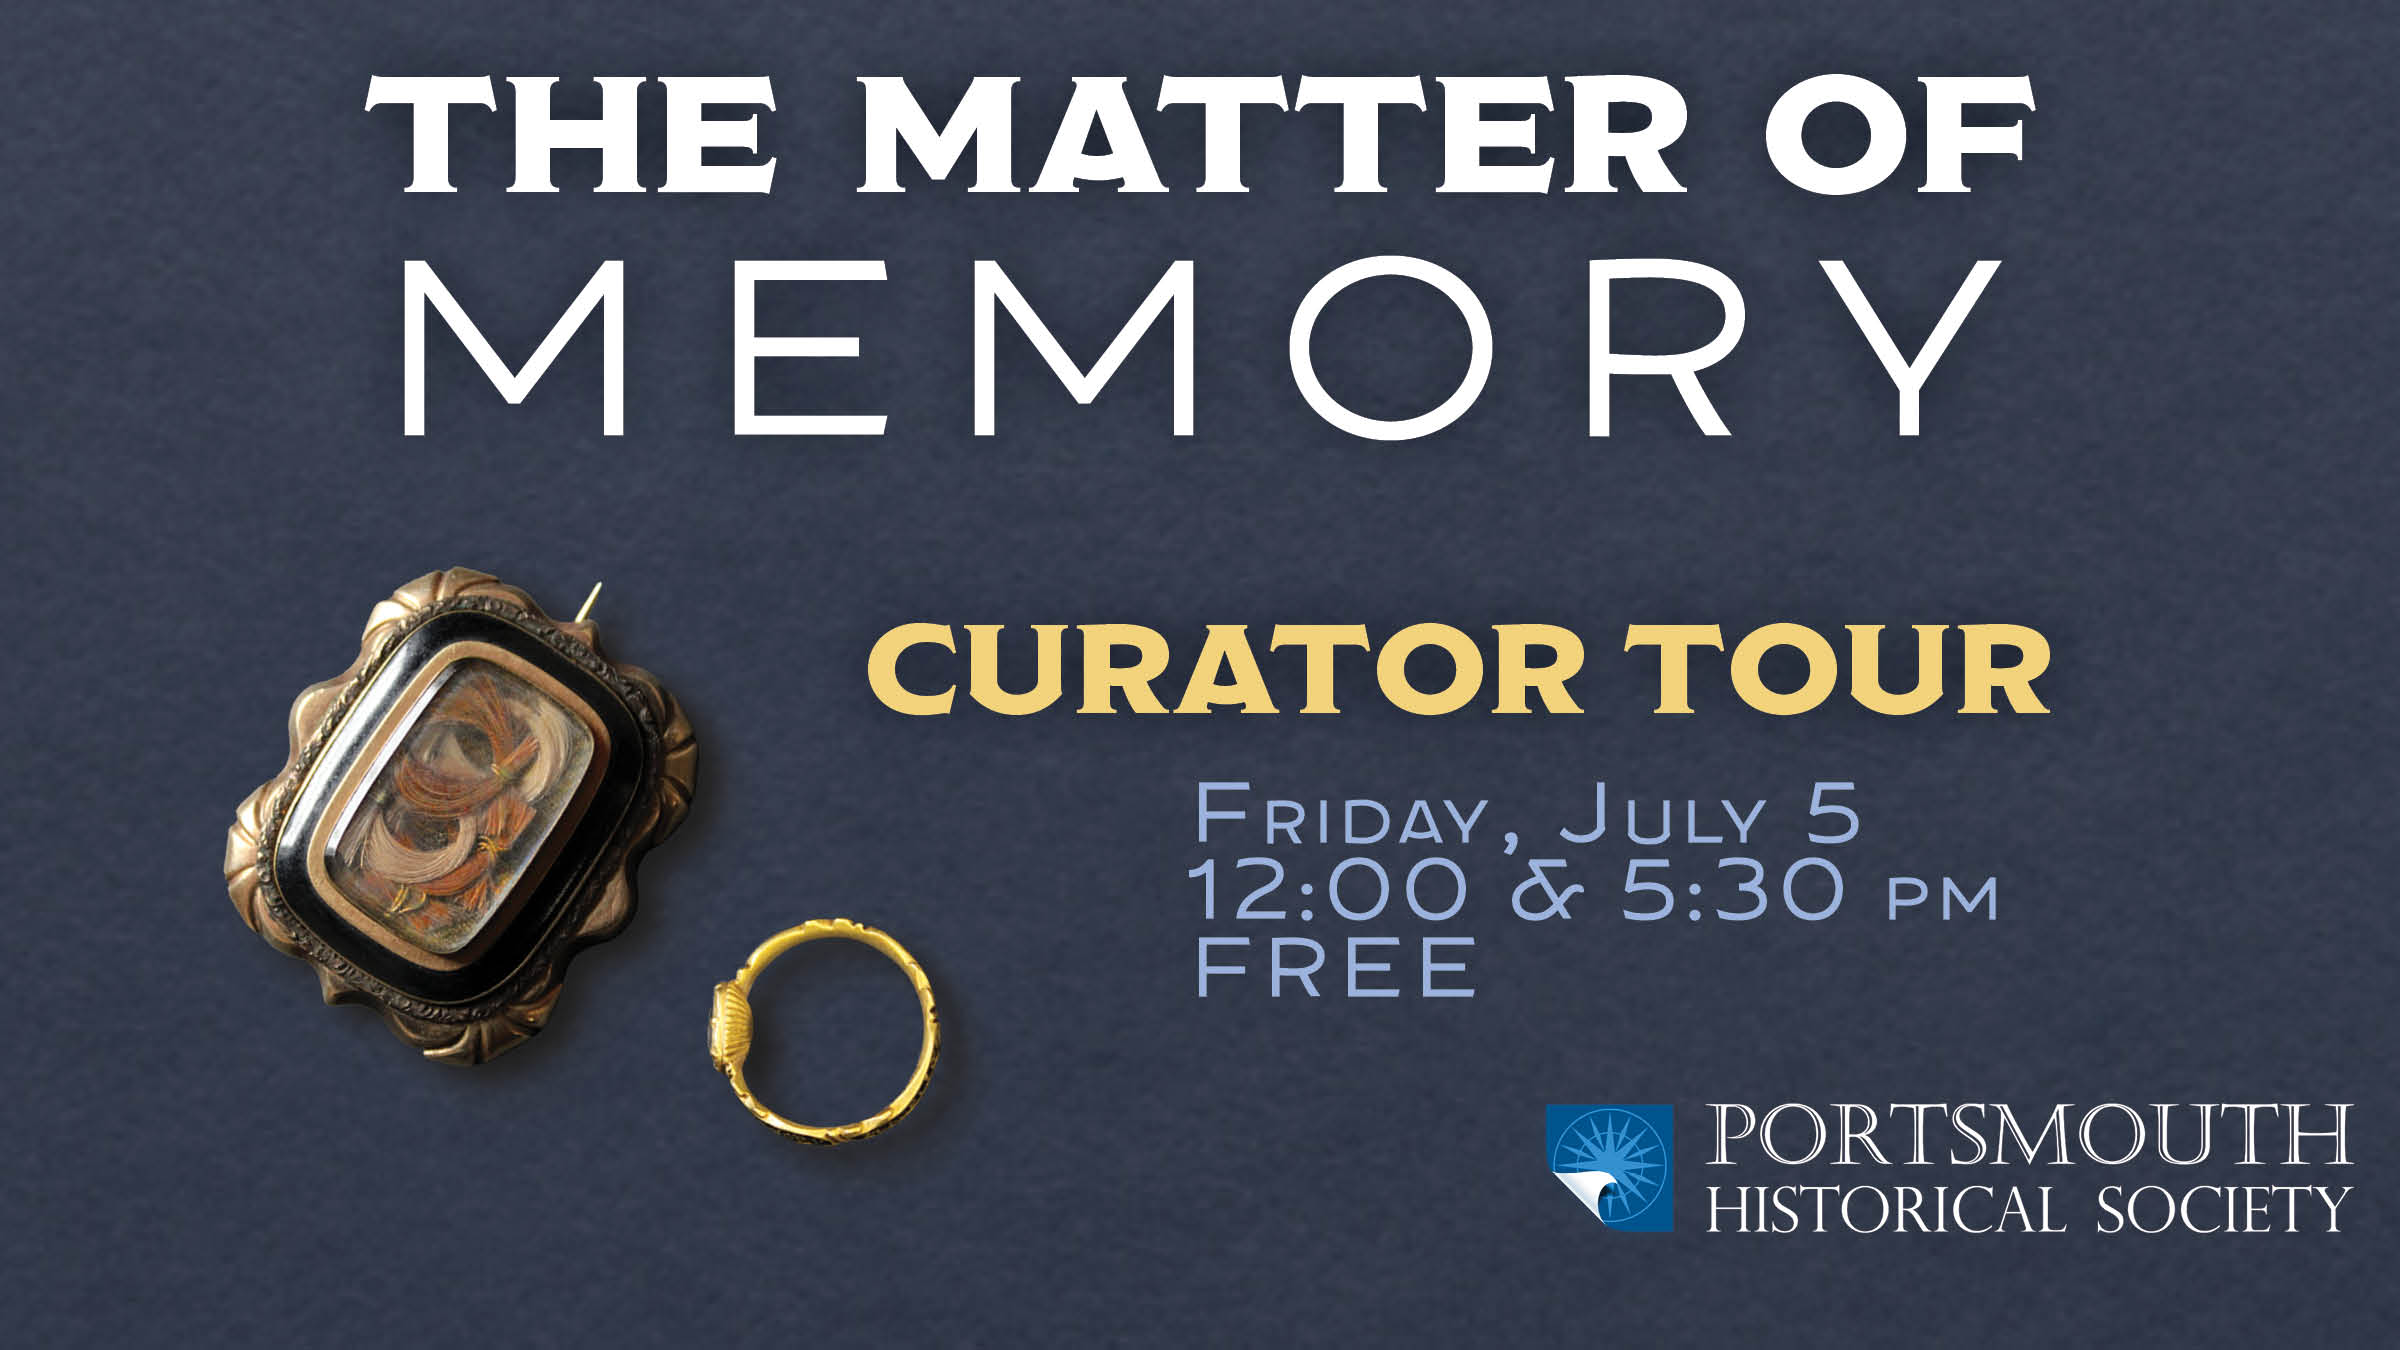 The Matter of Memory Curator Tour. Every first Friday at noon and 5:30 pm. Free.